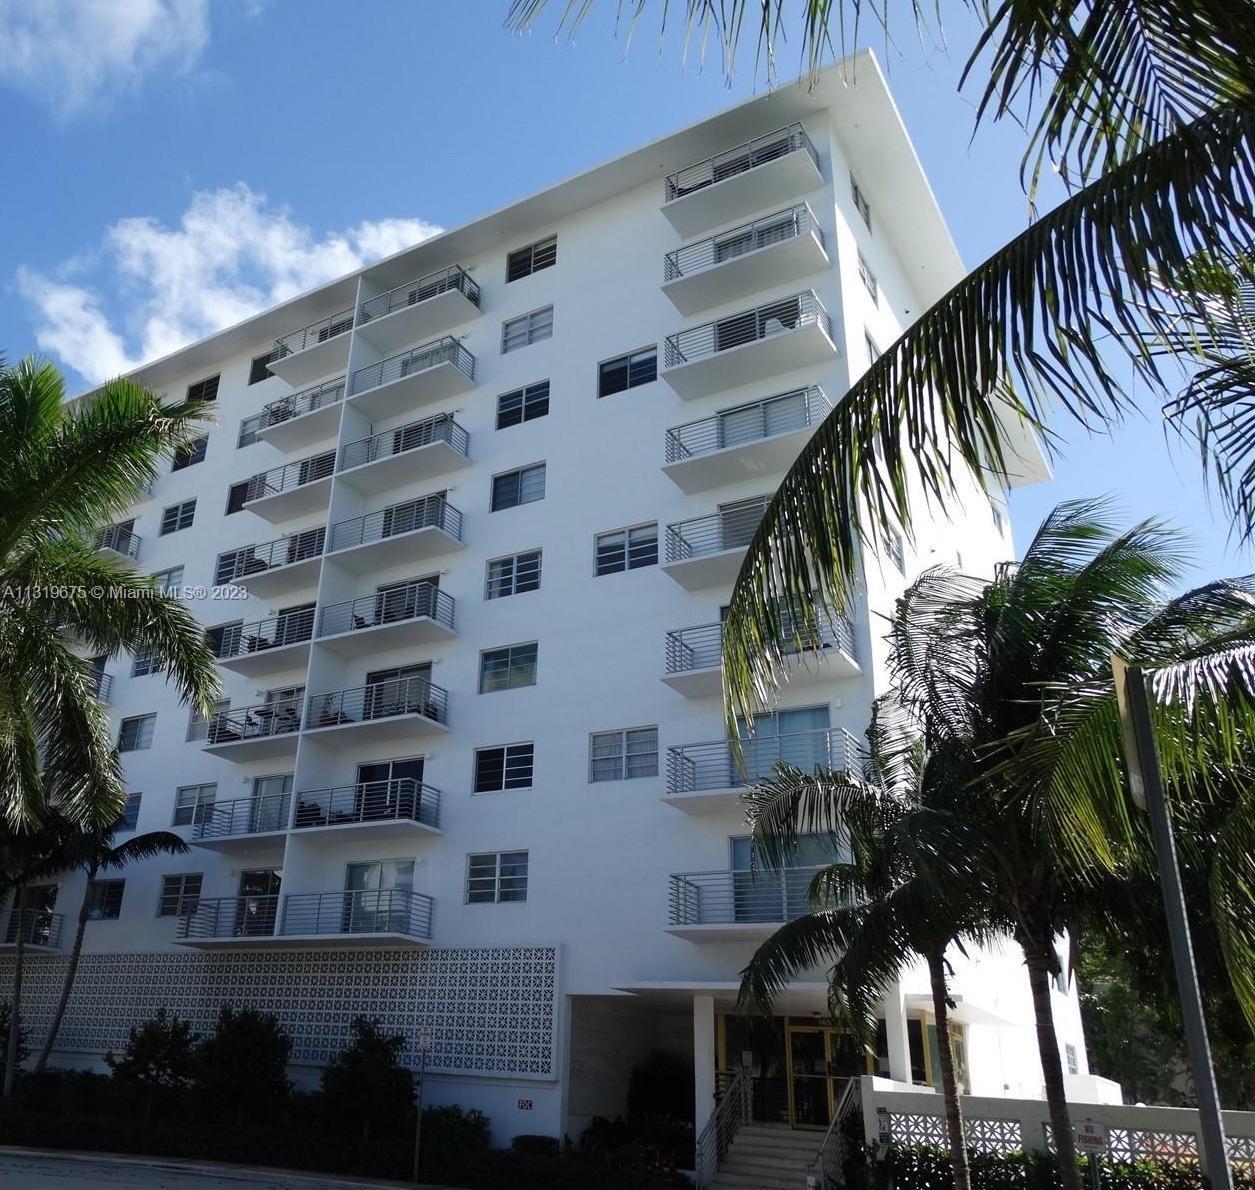 Most desirable location in South Beach 1 bedroom 1.5 baths. balcony, amazing bay views, pool. New im